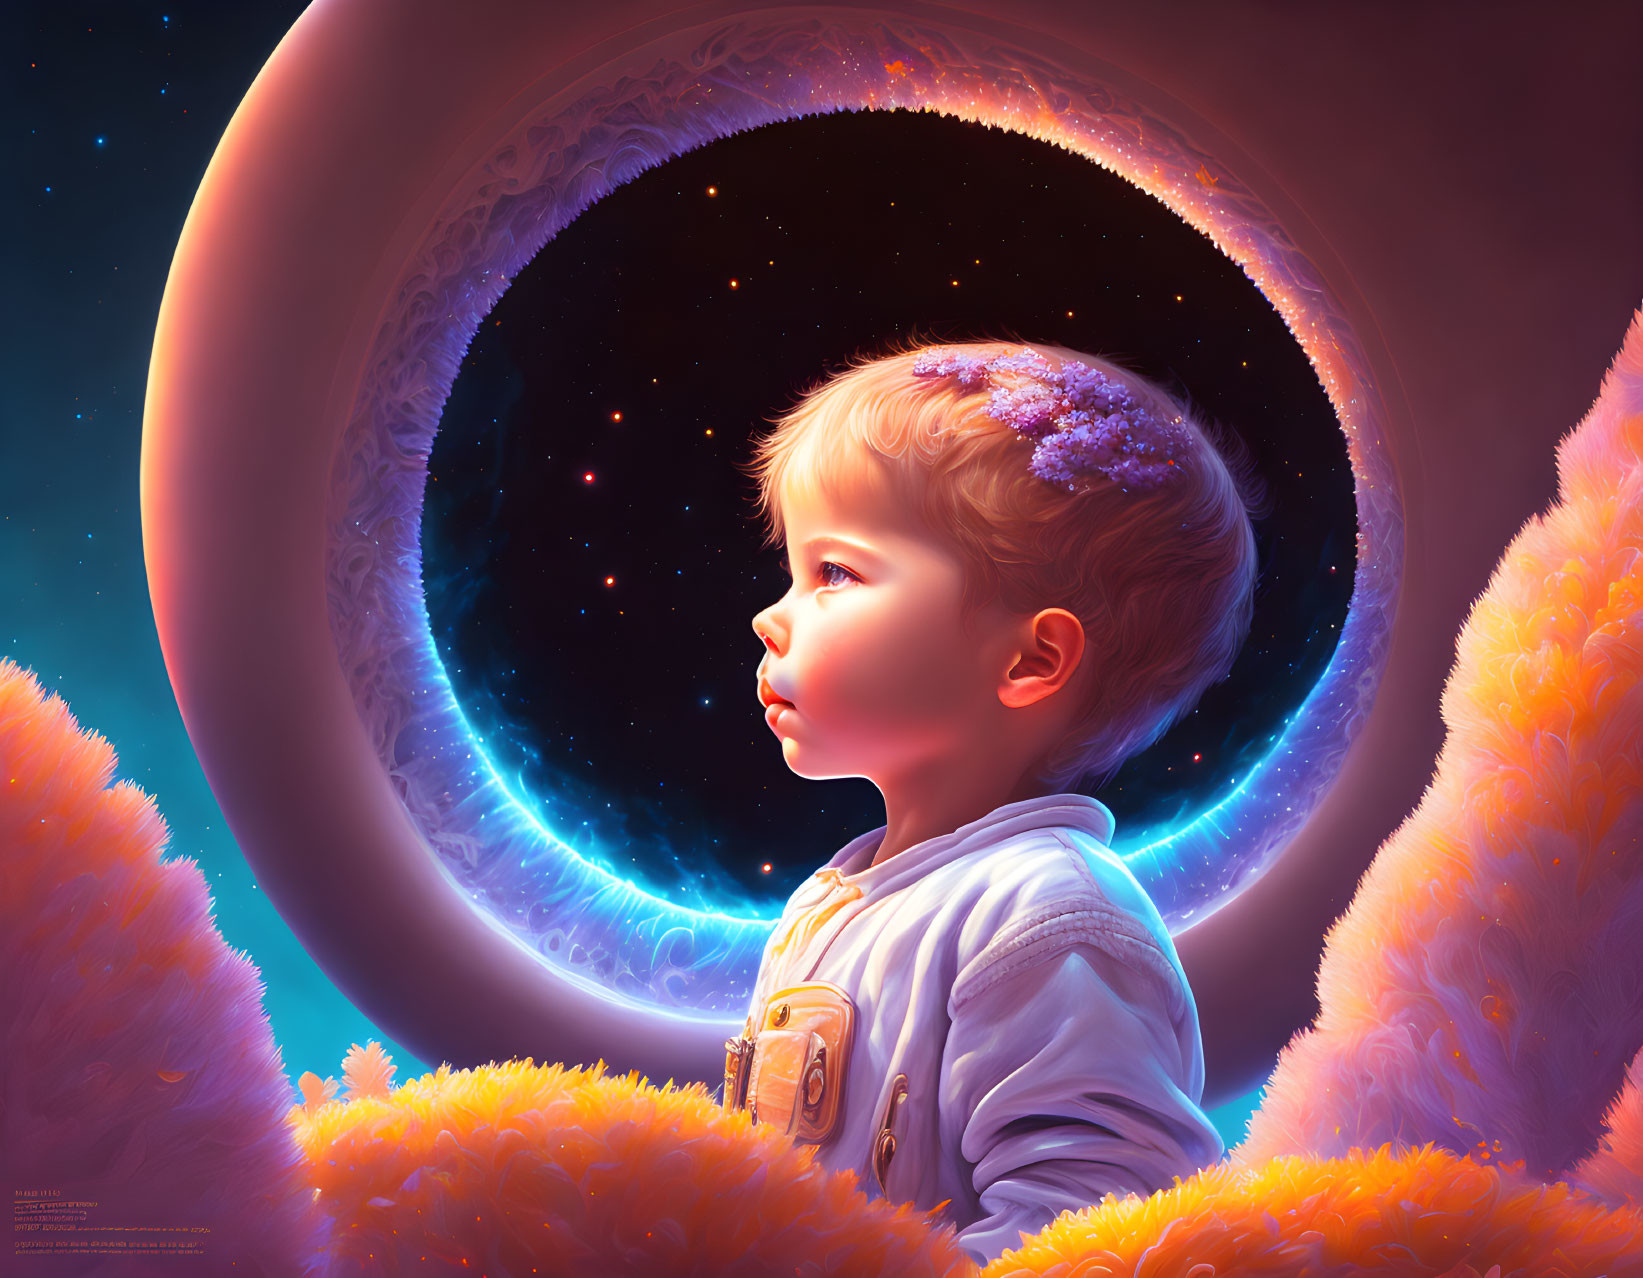 Child in denim jacket surrounded by orange foliage gazes at cosmic portal in starry sky